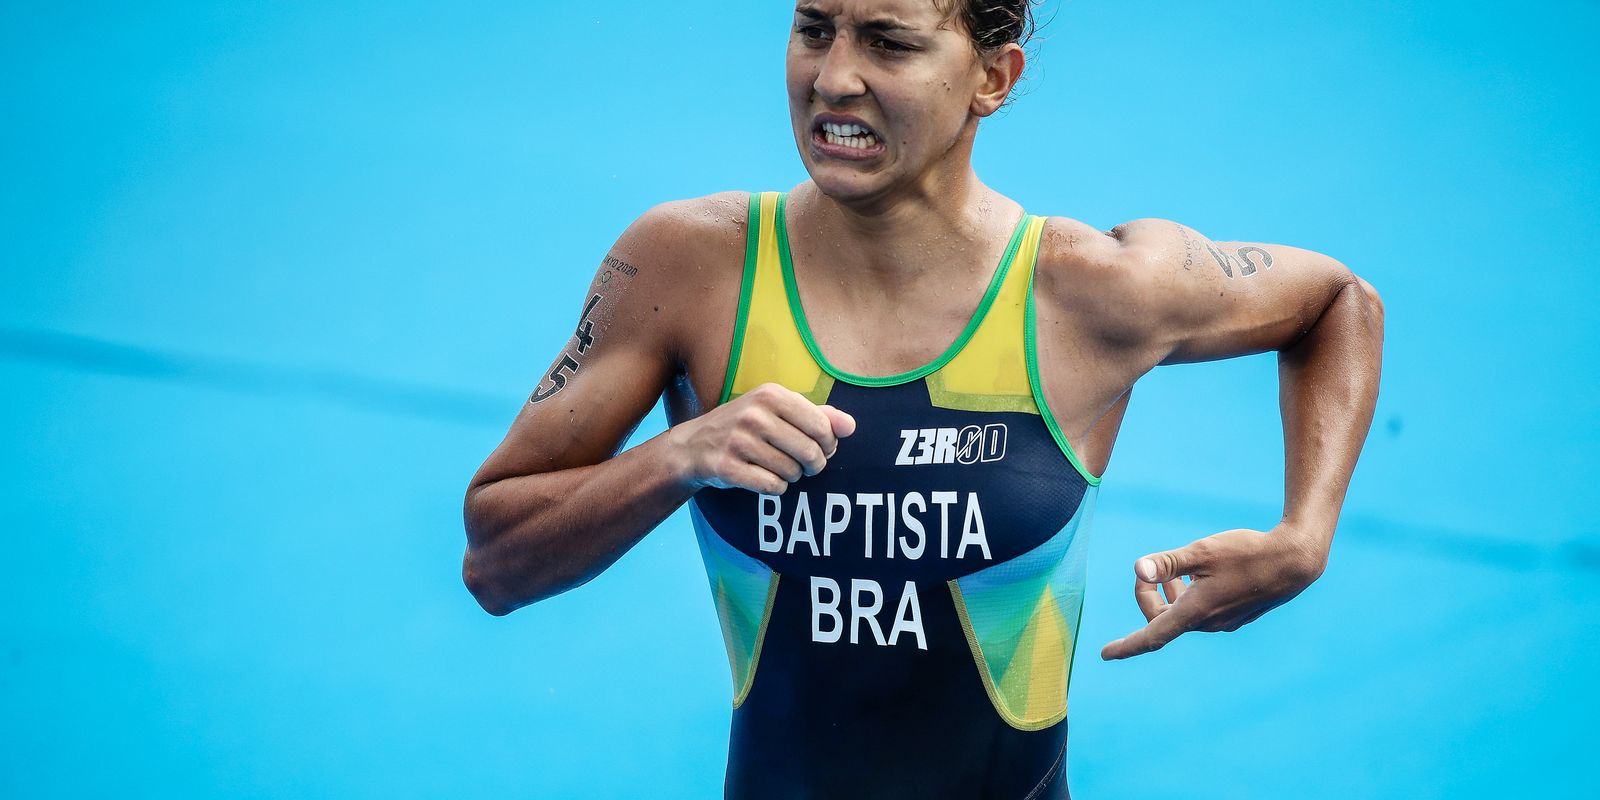 Copa America triathlon has Brazil one-two at the top of the podium